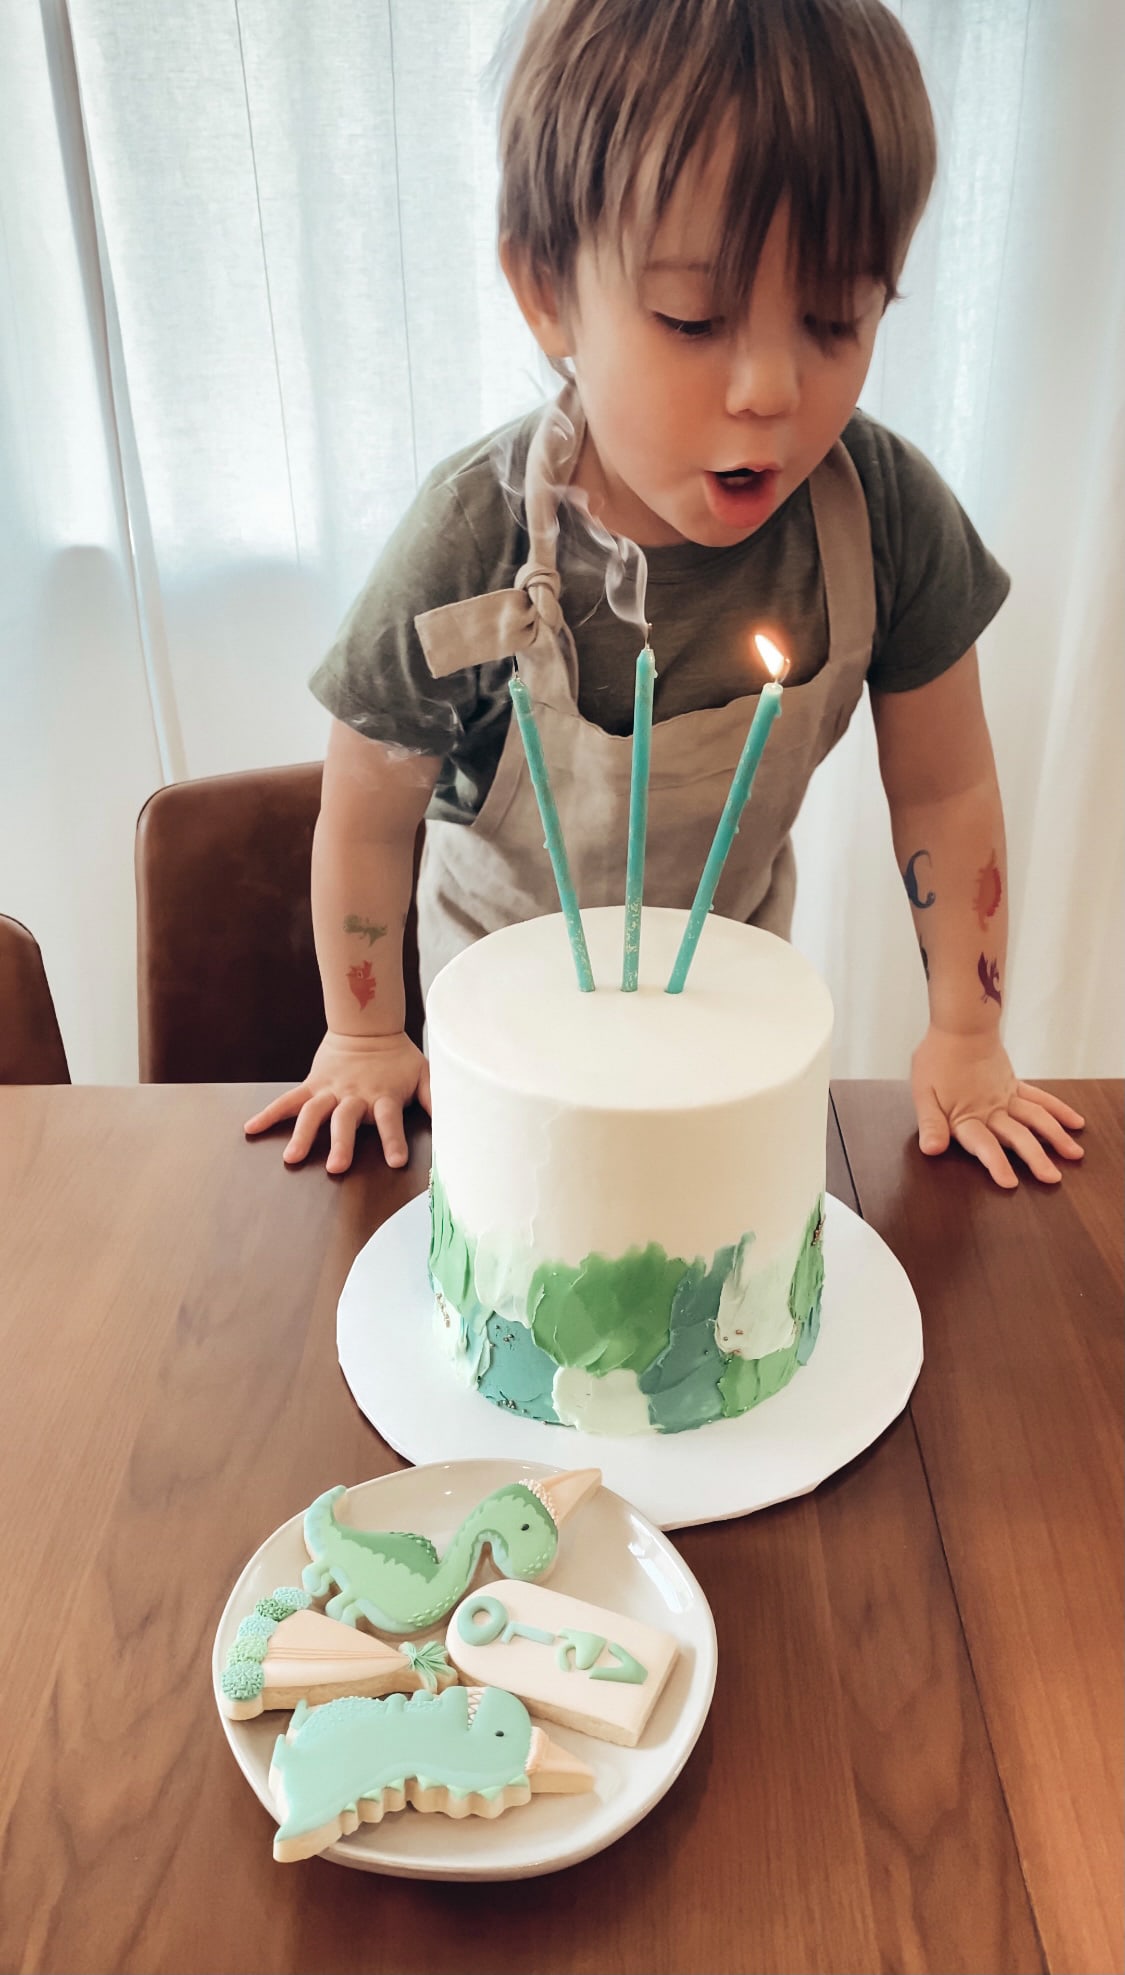 A little boy blows out three candles on a birthday cake. There are cookies decorated with dinosaurs on a plate next to him. 